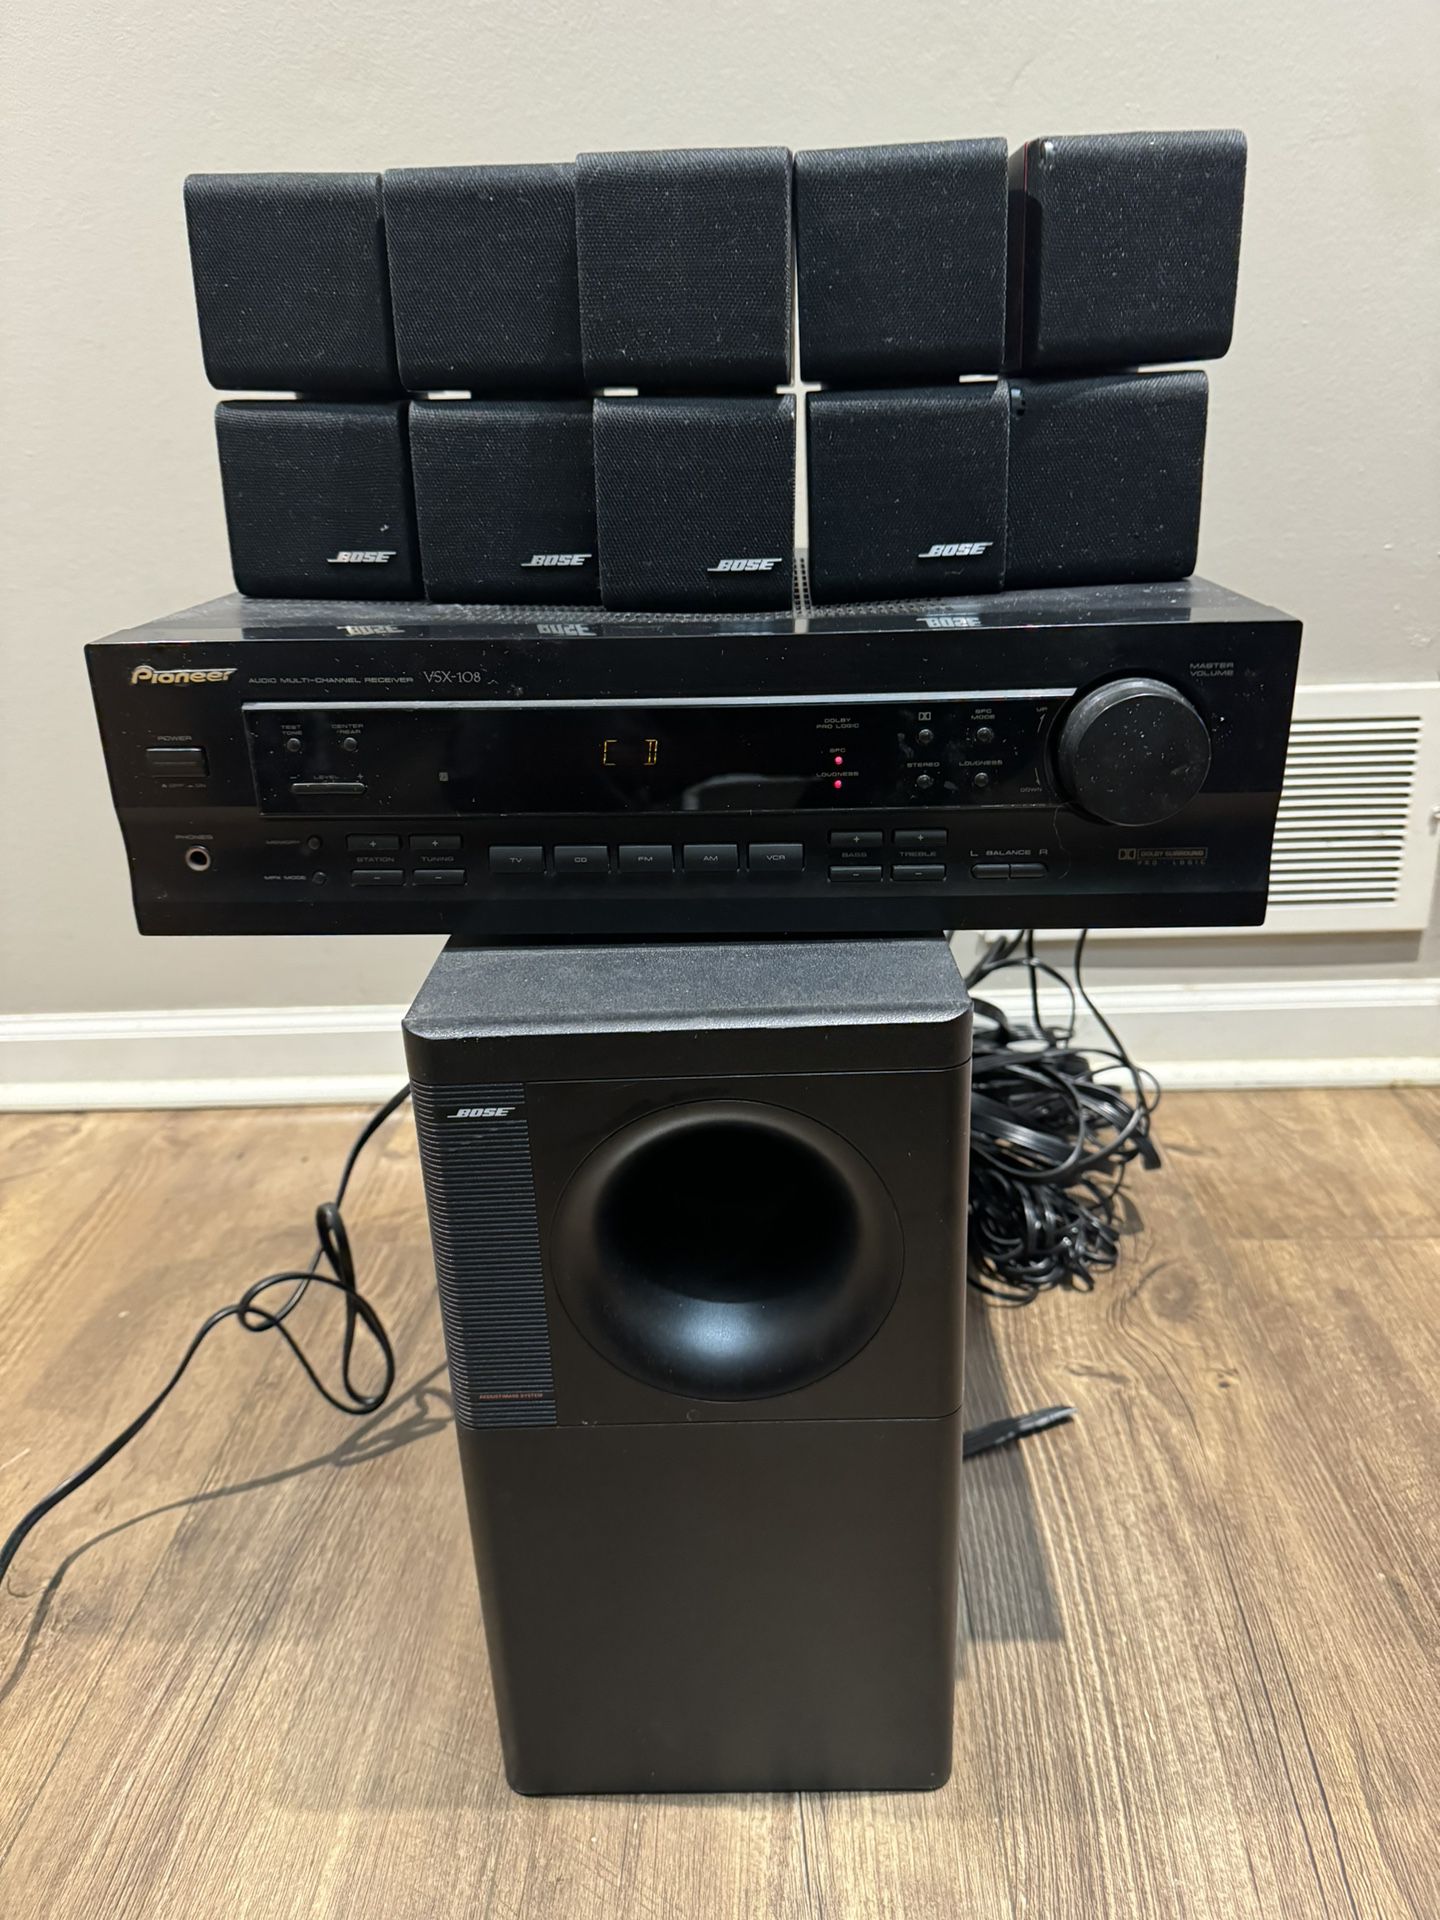 Bose Acoustimass 10 Home Theater Speaker System